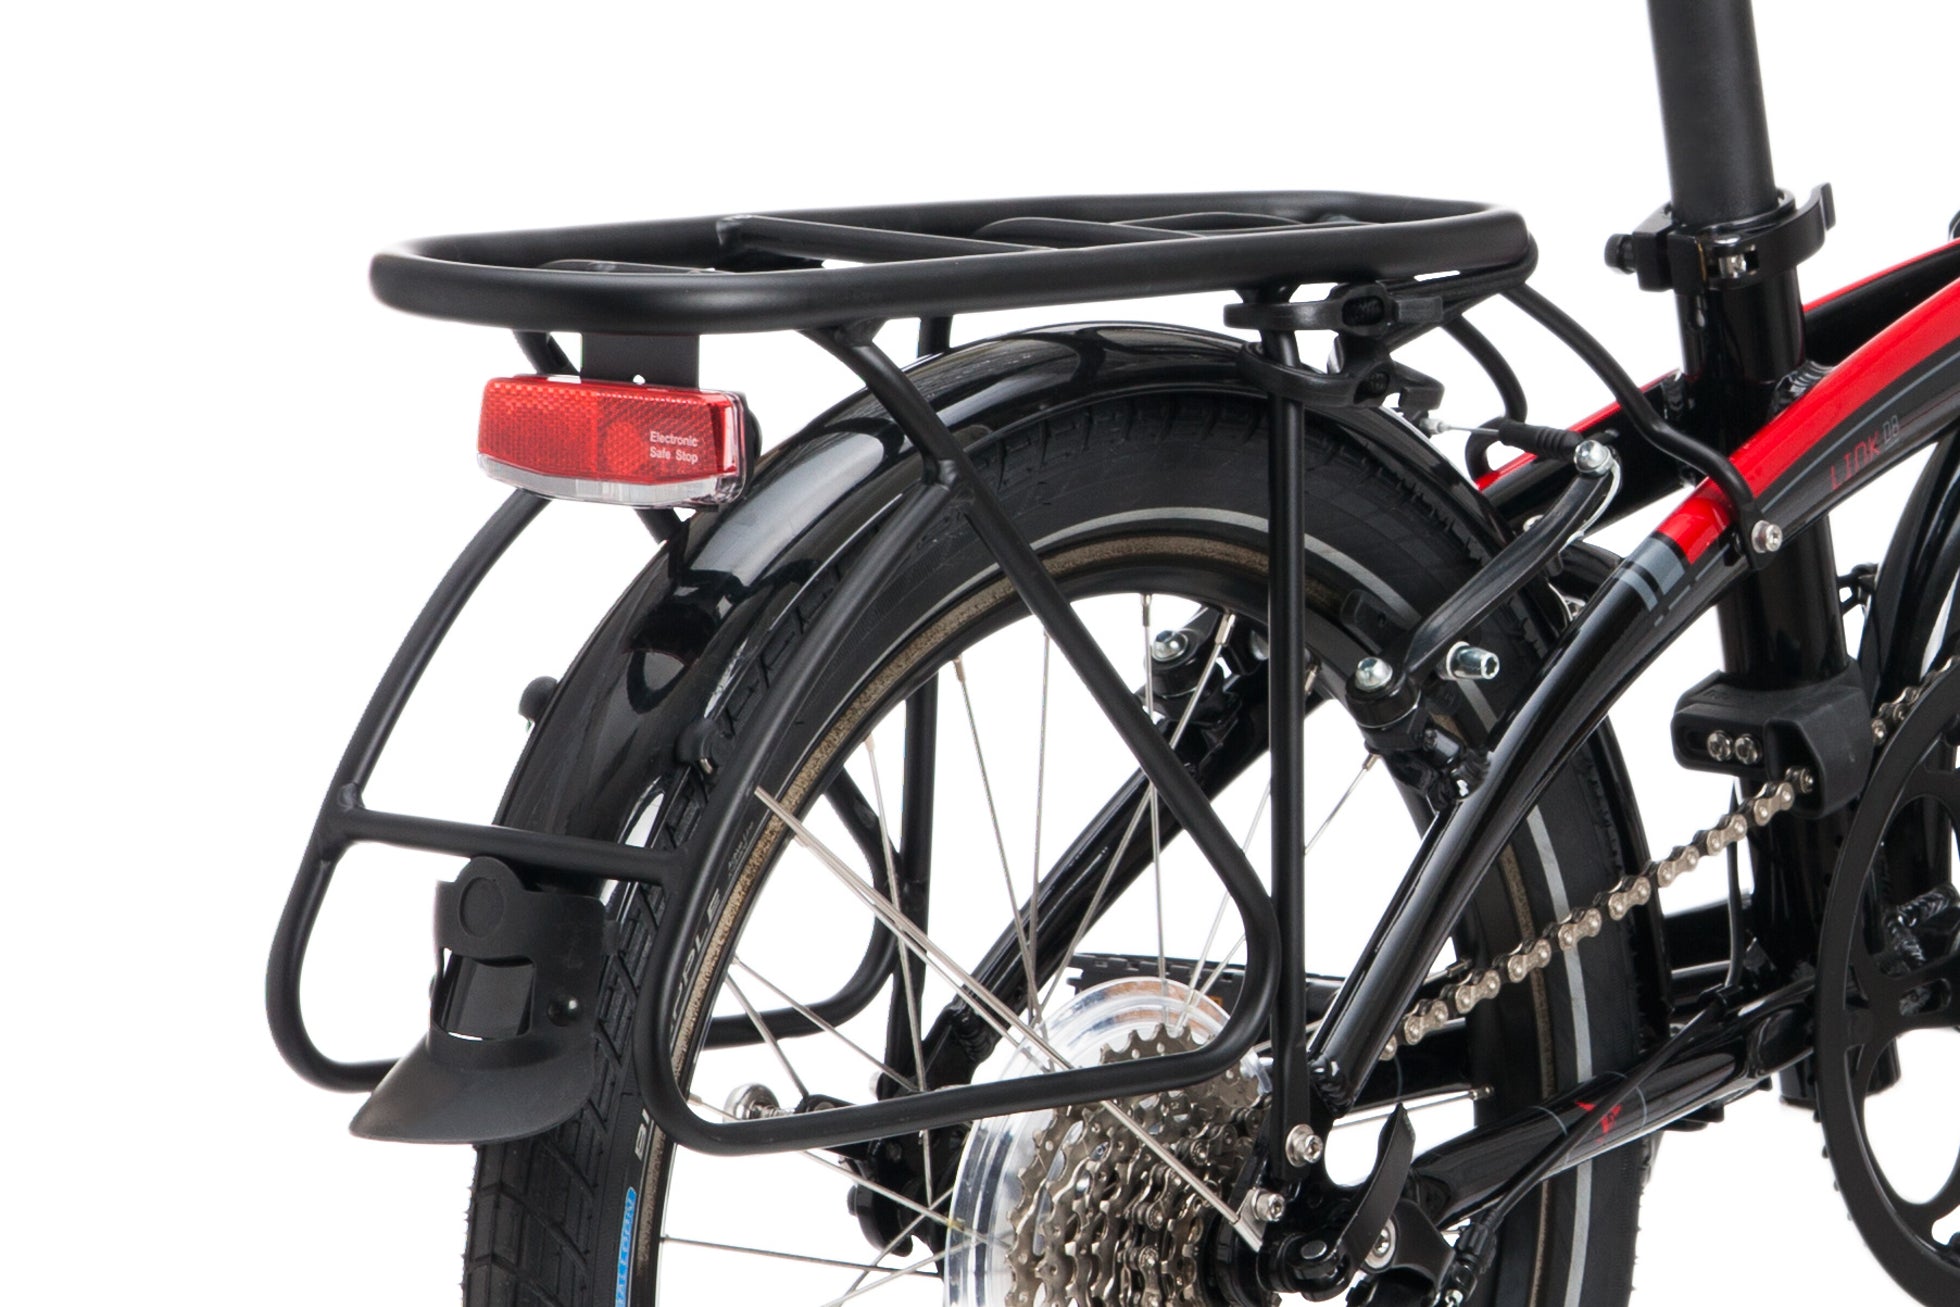 Tern Cargo Rack-Optimized for Kid-Carrying, with the Yepp Maxi 